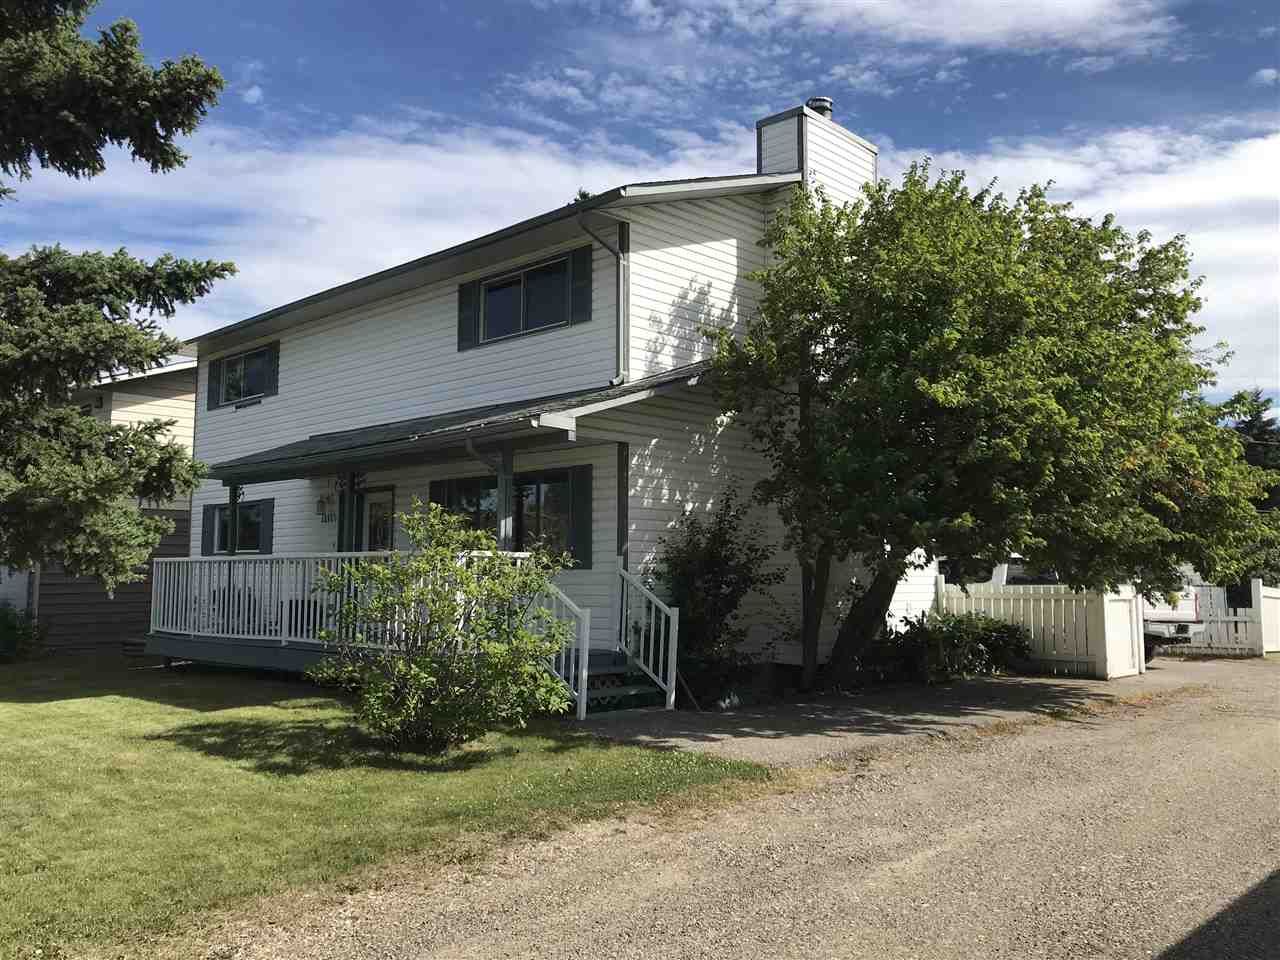 Main Photo: 11115 102 STREET in : Fort St. John - City NW House for sale : MLS®# R2485022